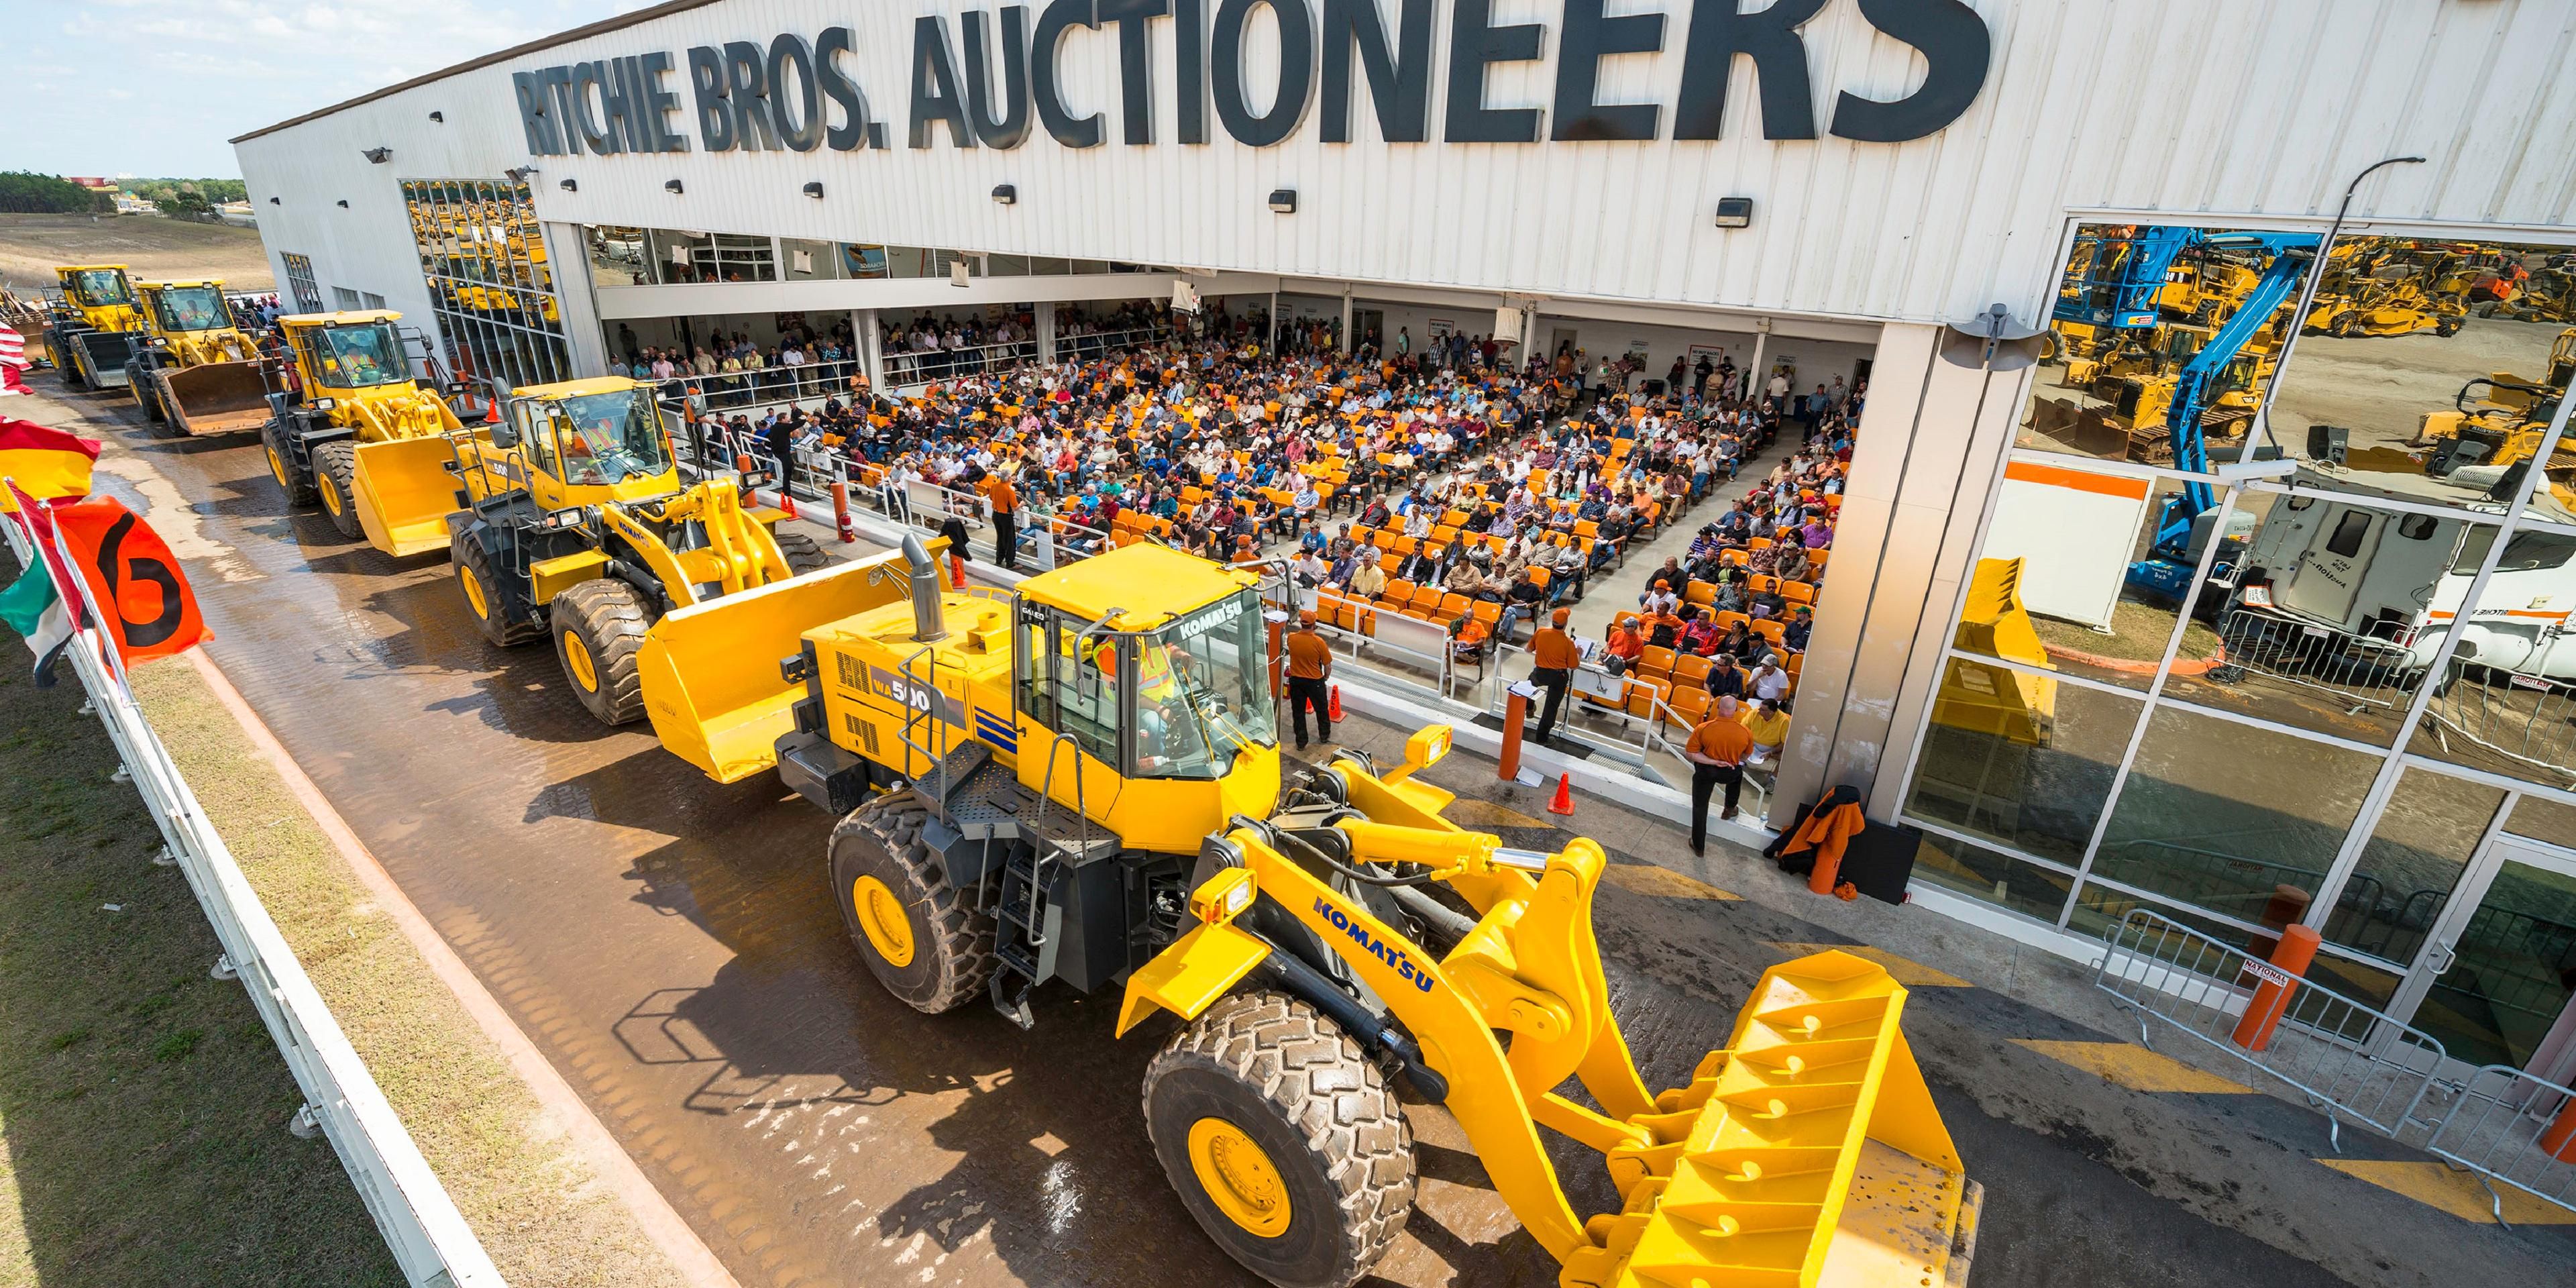 Located less than one mile from the hotel, Ritchie Bros. Auctioneers, is industrial asset disposition & management company, selling heavy industrial equipment and trucks through live and online auctions, and other transactional channels.